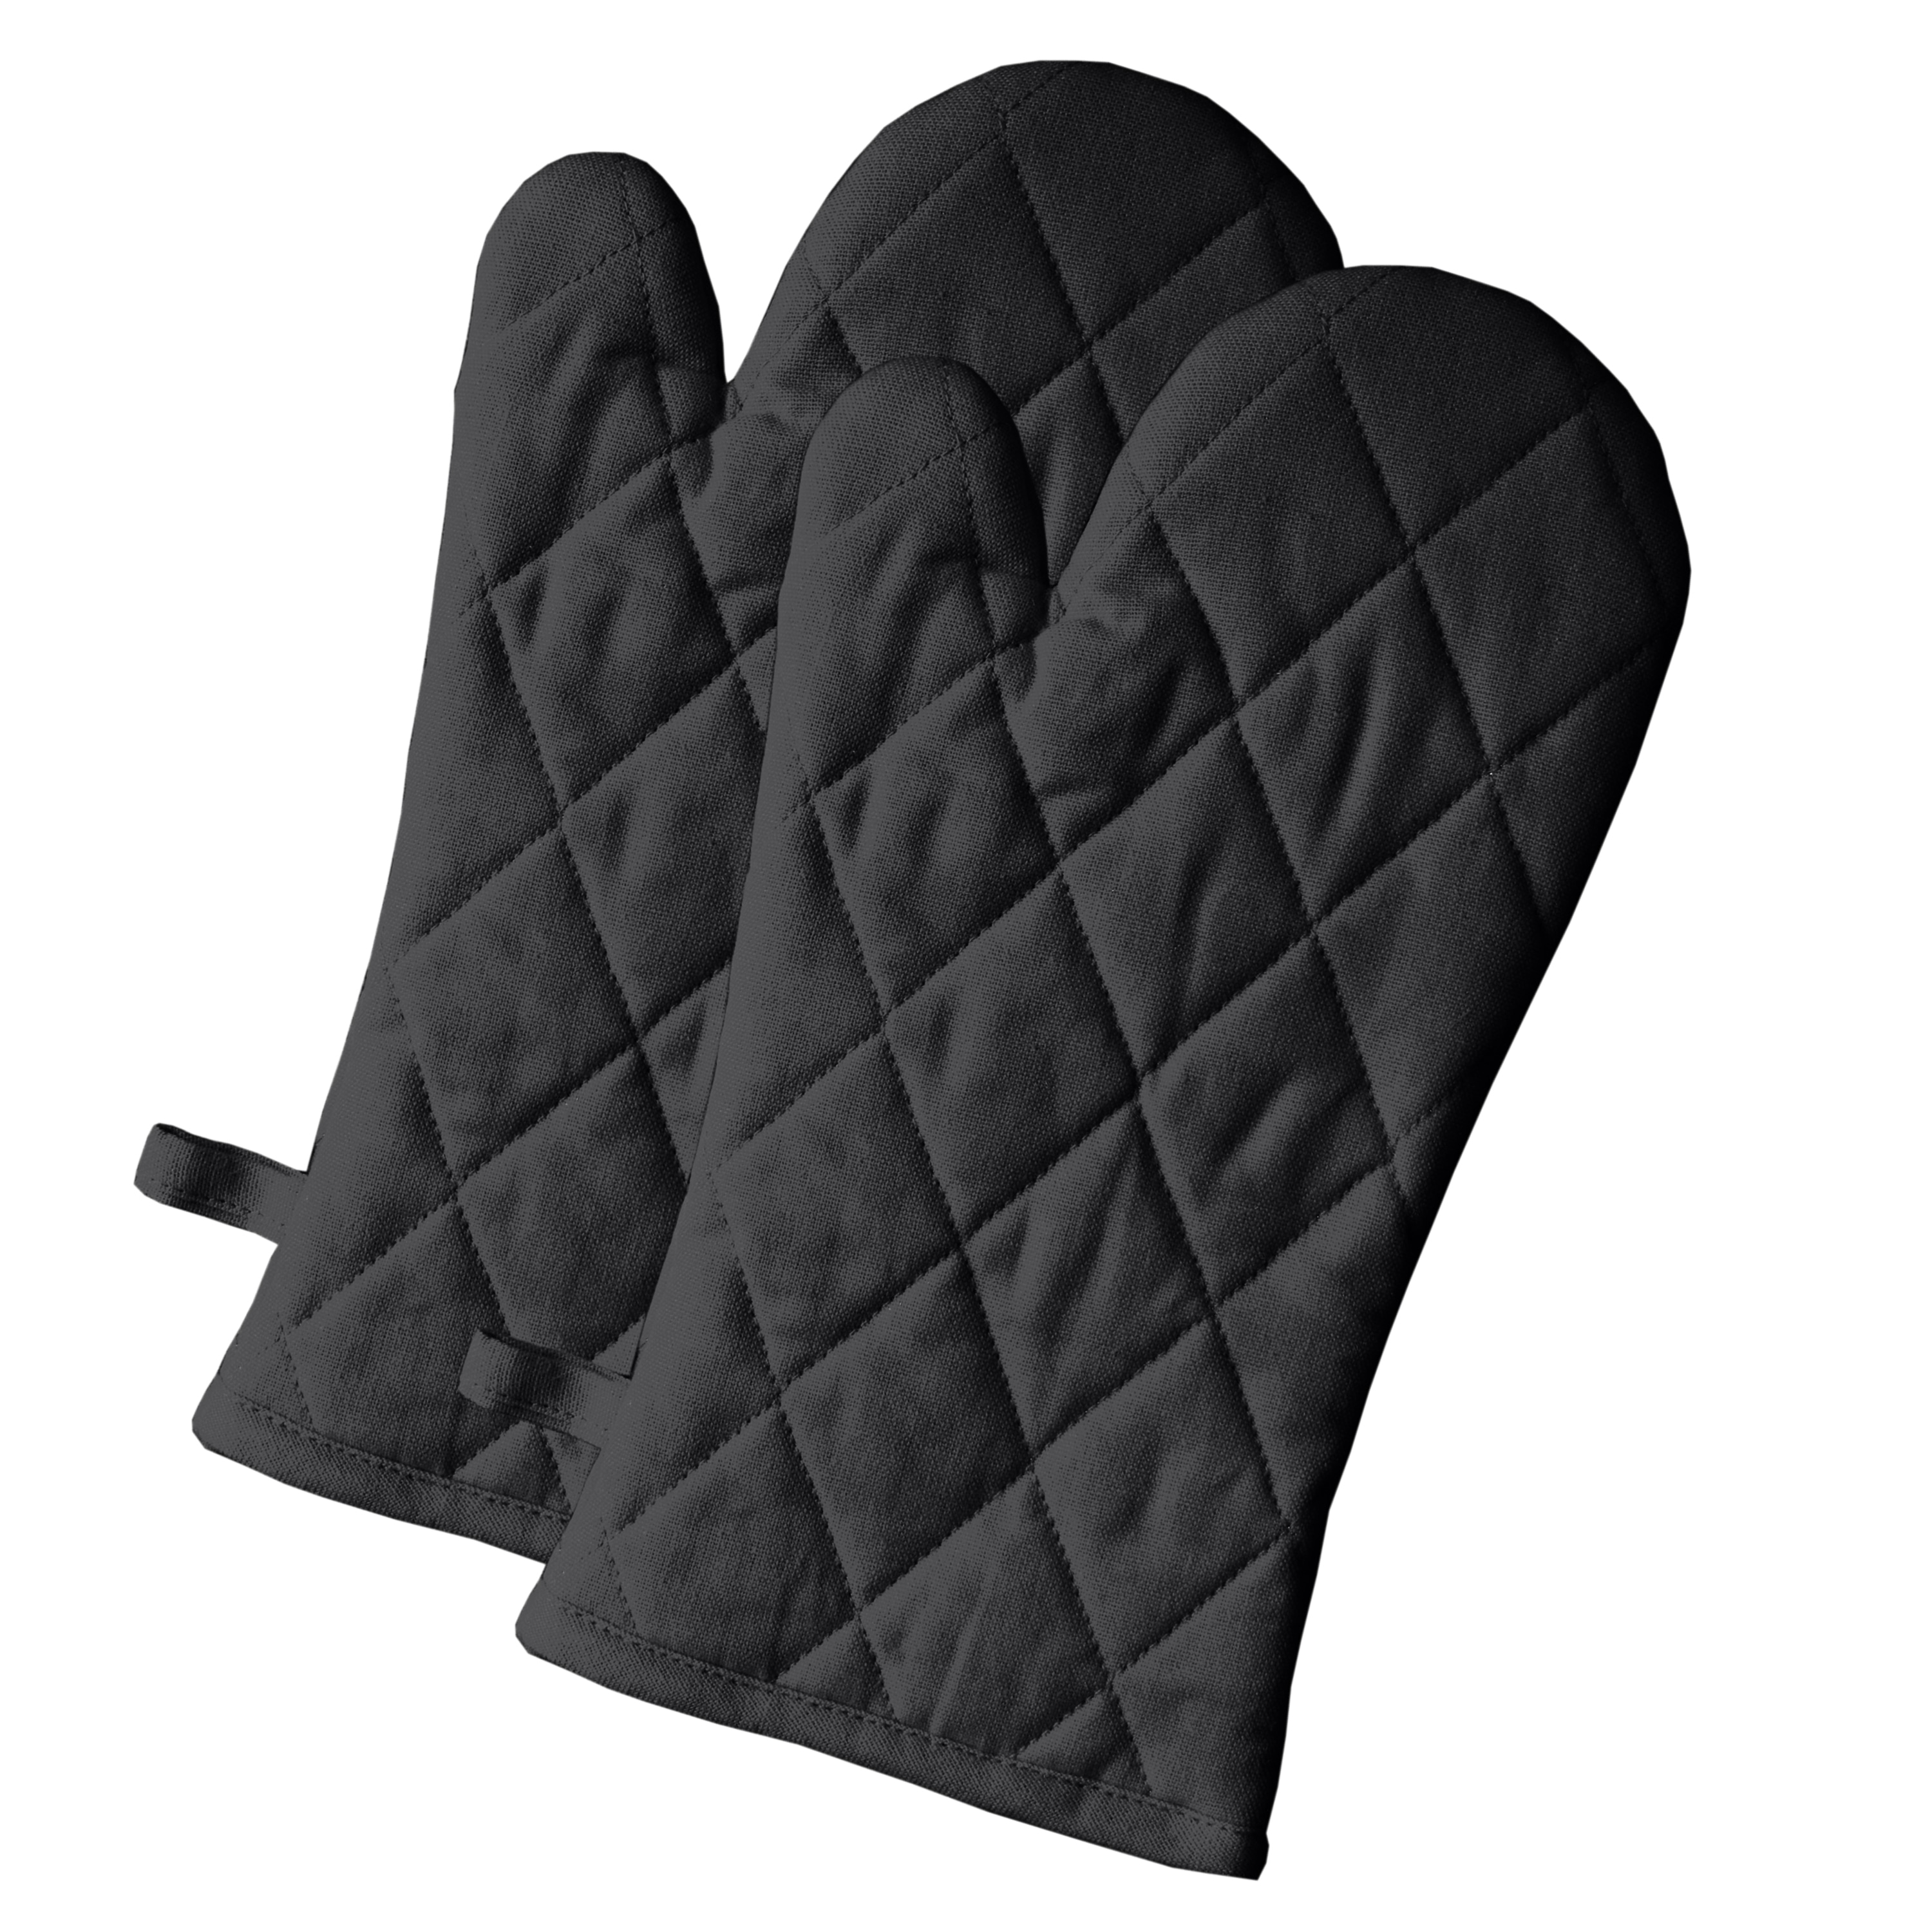 https://ak1.ostkcdn.com/images/products/is/images/direct/030115a231cb8c5ad397d305d0e0c53d50eee9c0/Fabstyles-Solo-Waffle-Cotton-Oven-Mitt-%26-Pot-Holder-Set-of-4.jpg